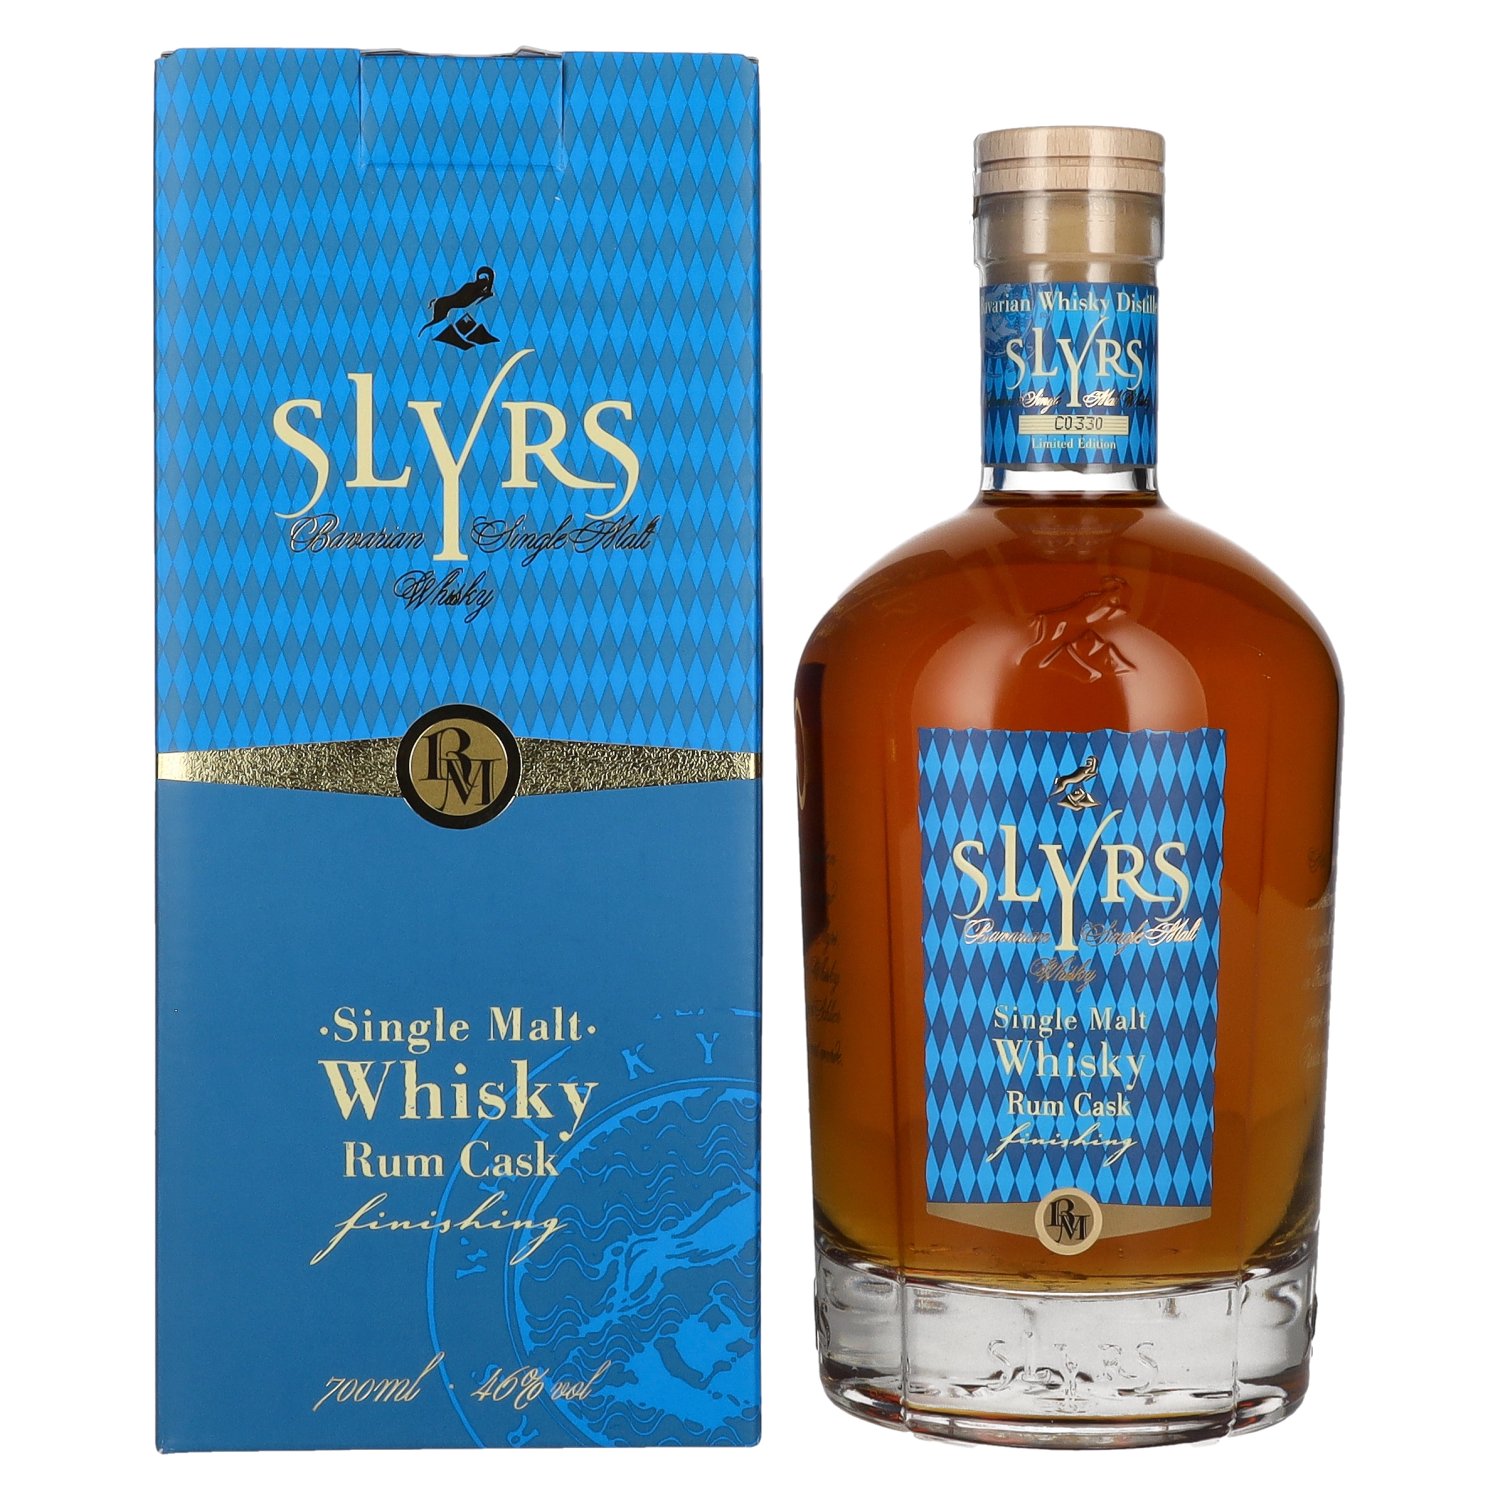 Slyrs RUM CASK FINISH Single Malt Whisky Limited Edition 46% Vol. 0,7l in  Giftbox